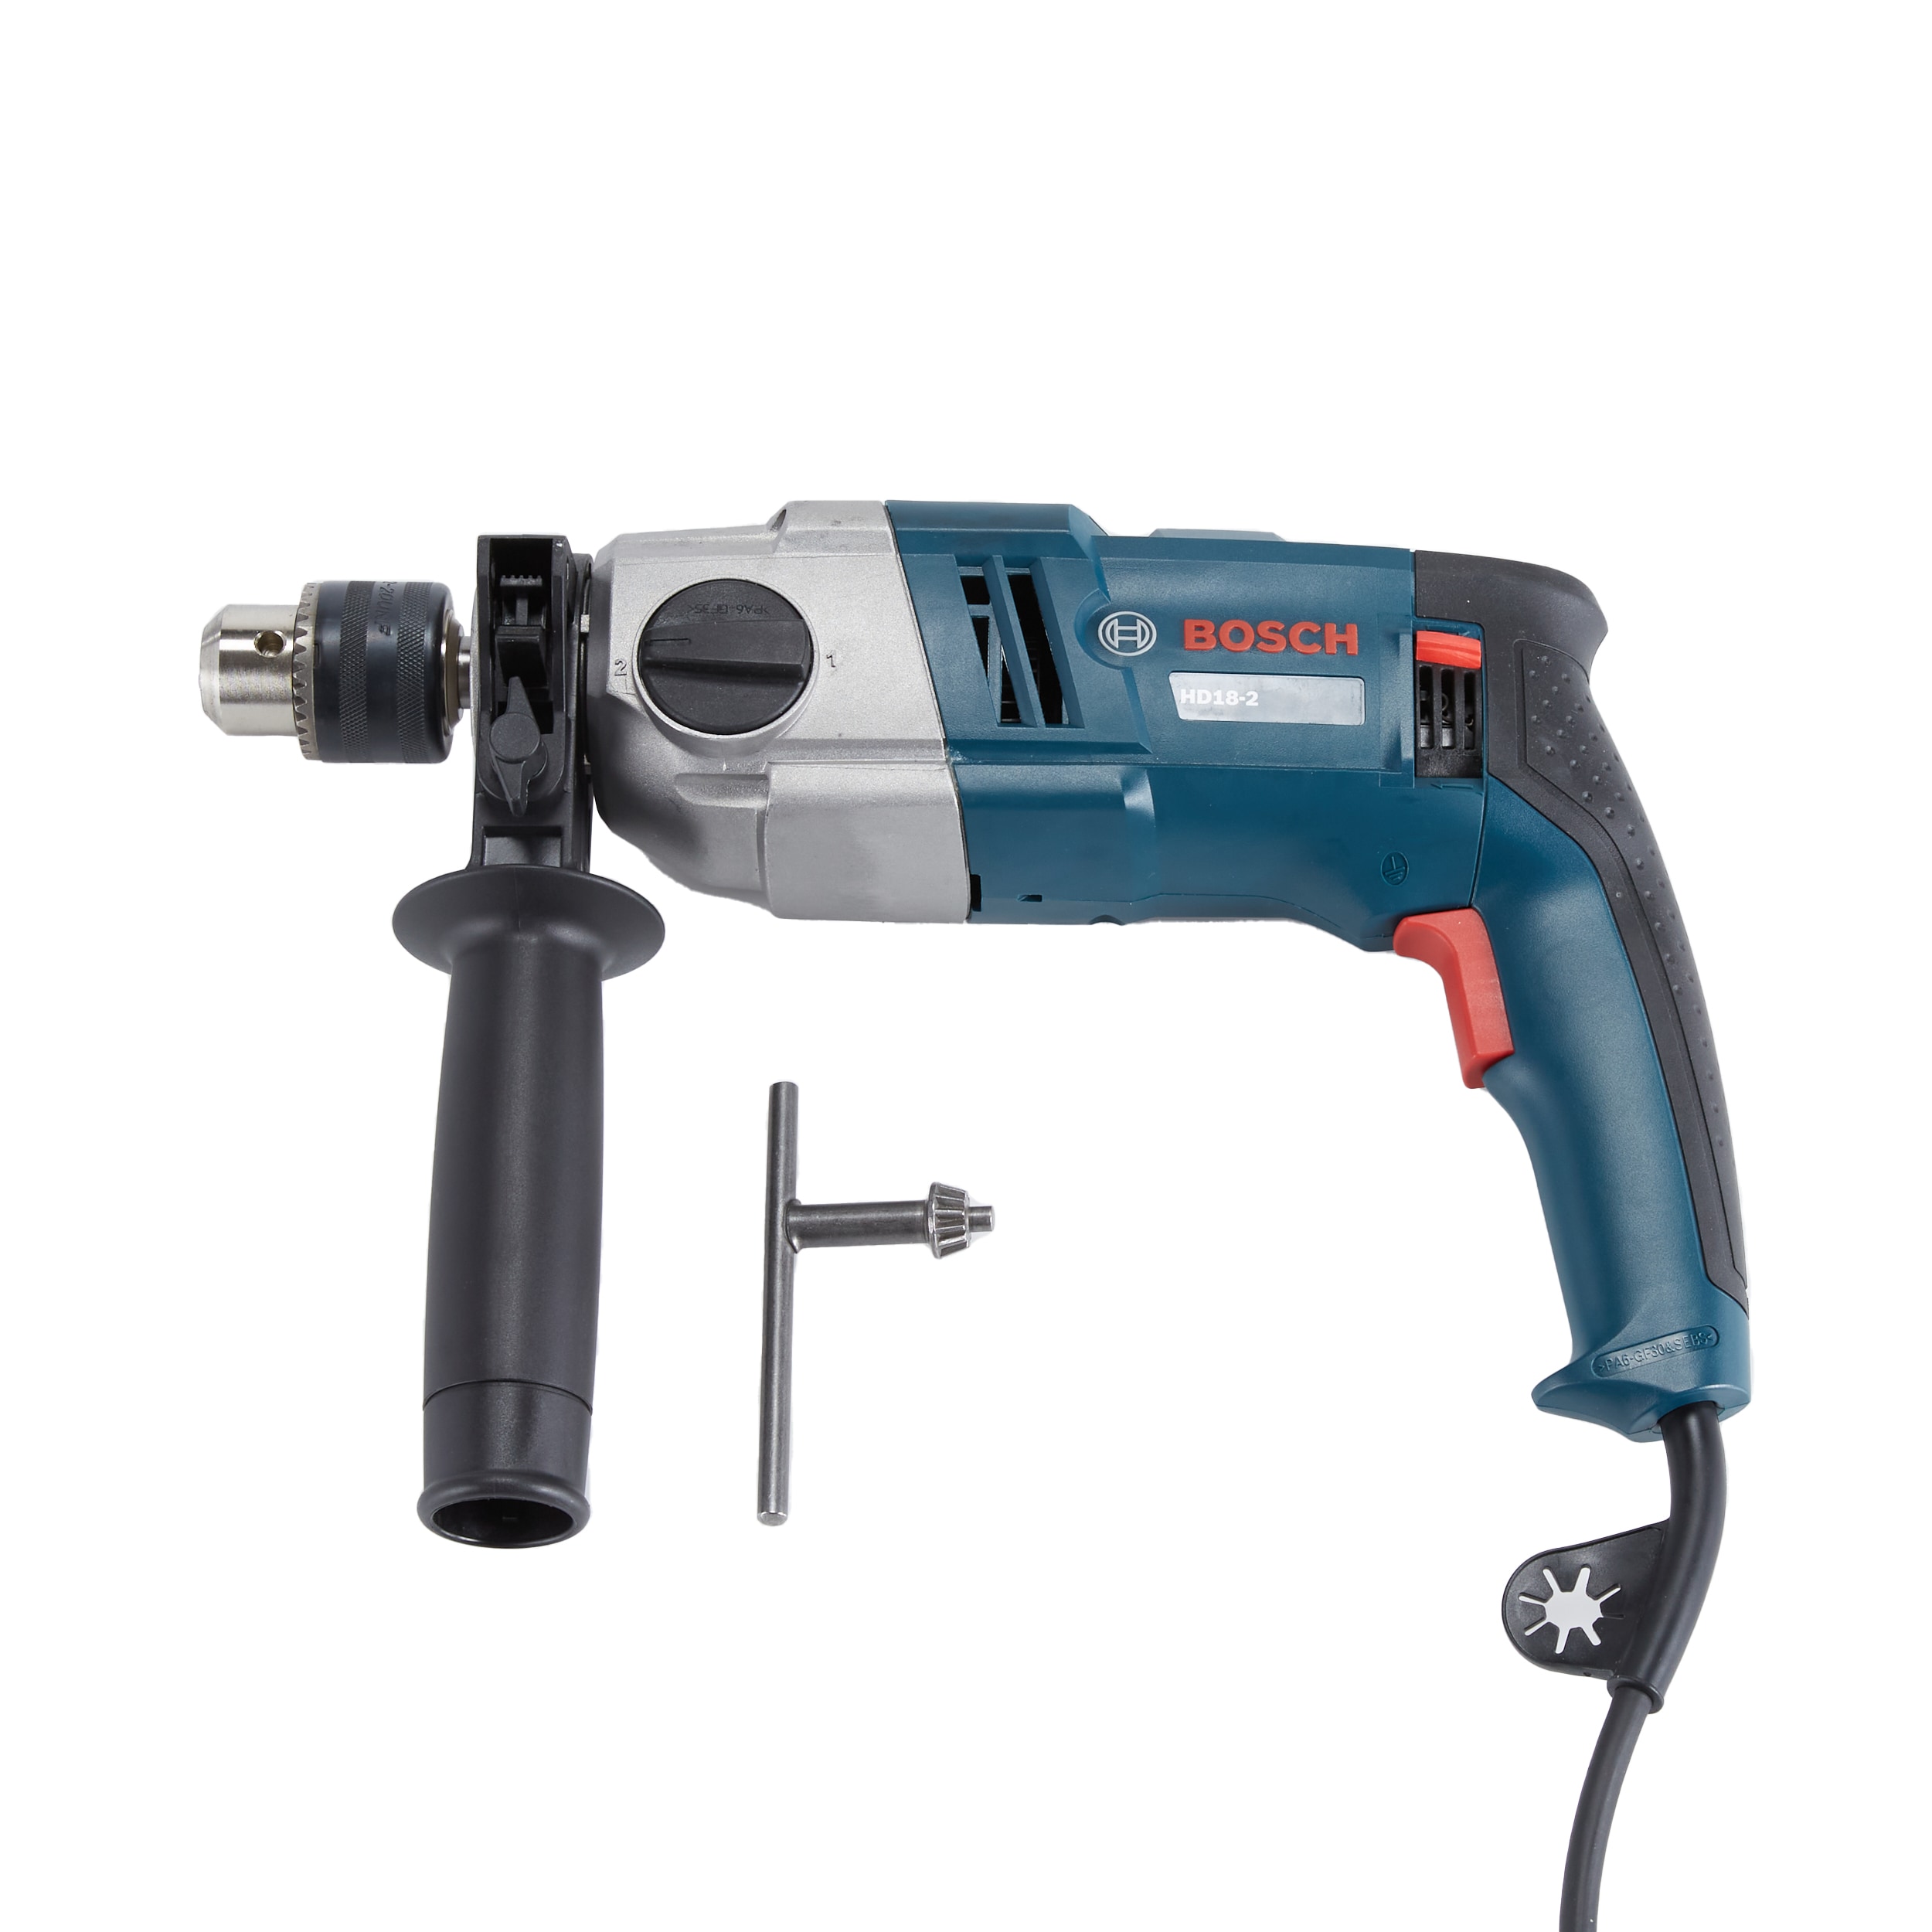 CRAFTSMAN 1/2-in 7-Amp Variable Speed Corded Hammer Drill